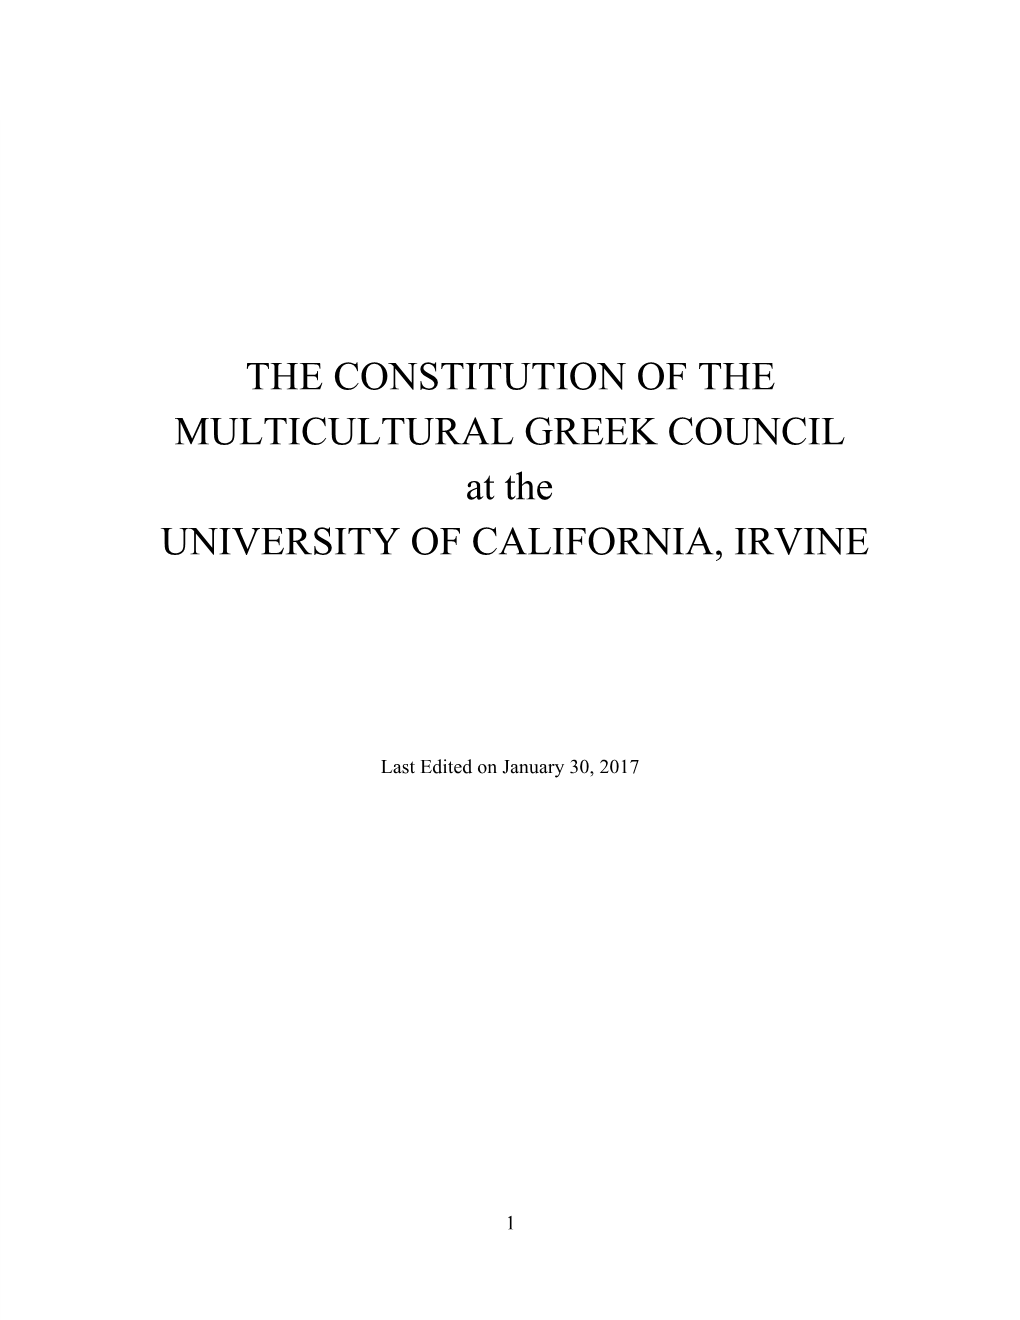 THE CONSTITUTION of the MULTICULTURAL GREEK COUNCIL at the UNIVERSITY of CALIFORNIA, IRVINE